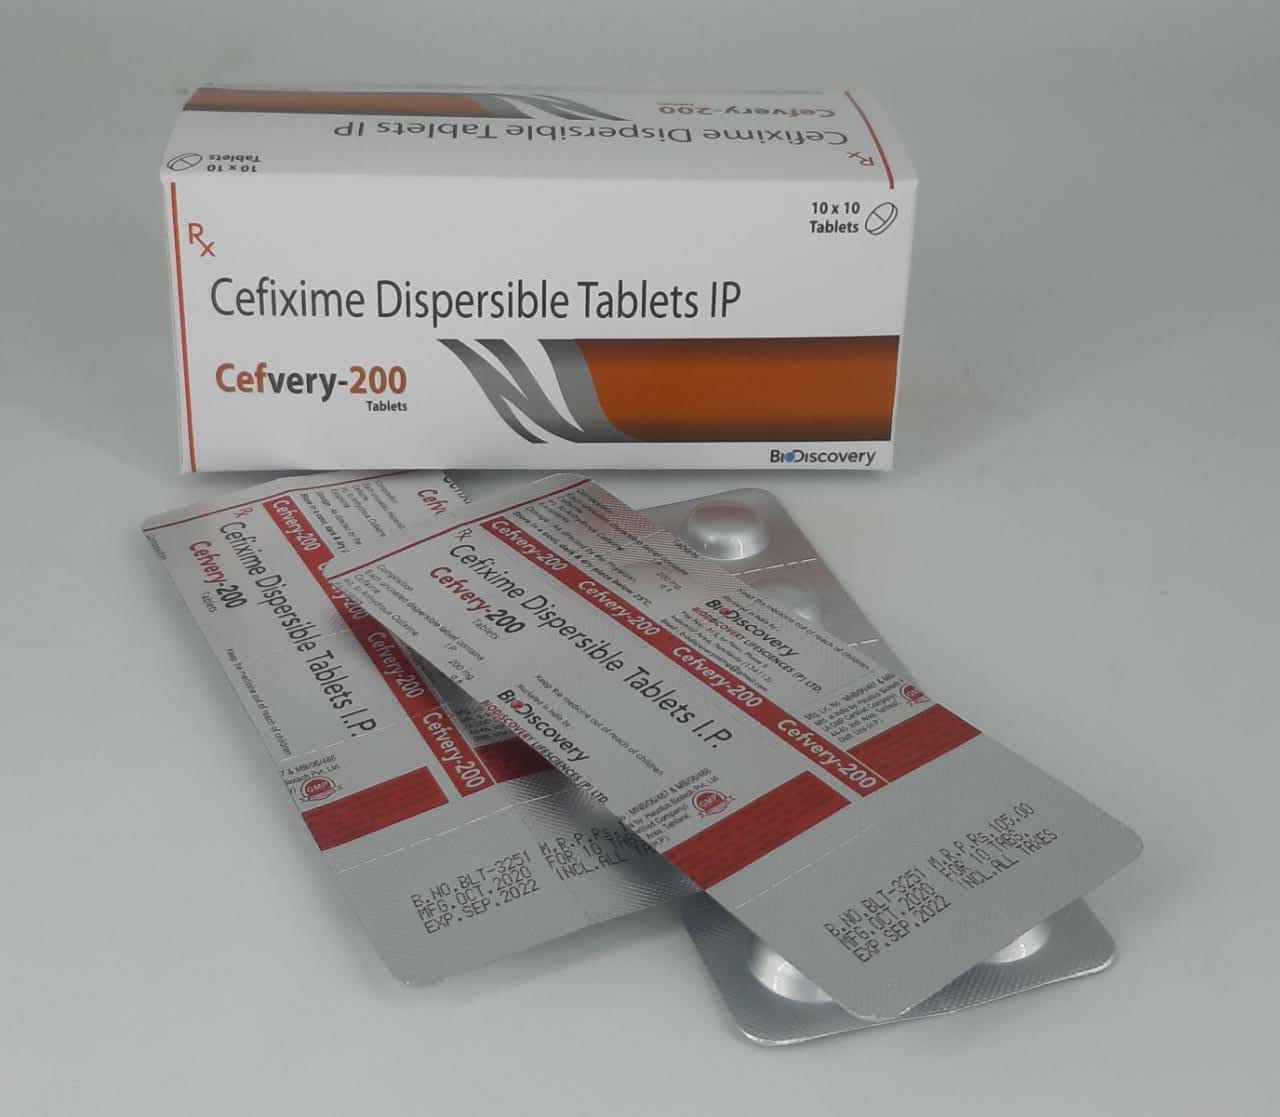 Product Name: Cefvery 200, Compositions of Cefvery 200 are Cefixime Dispersable Tablets IP - Biodiscovery Lifesciences Pvt Ltd